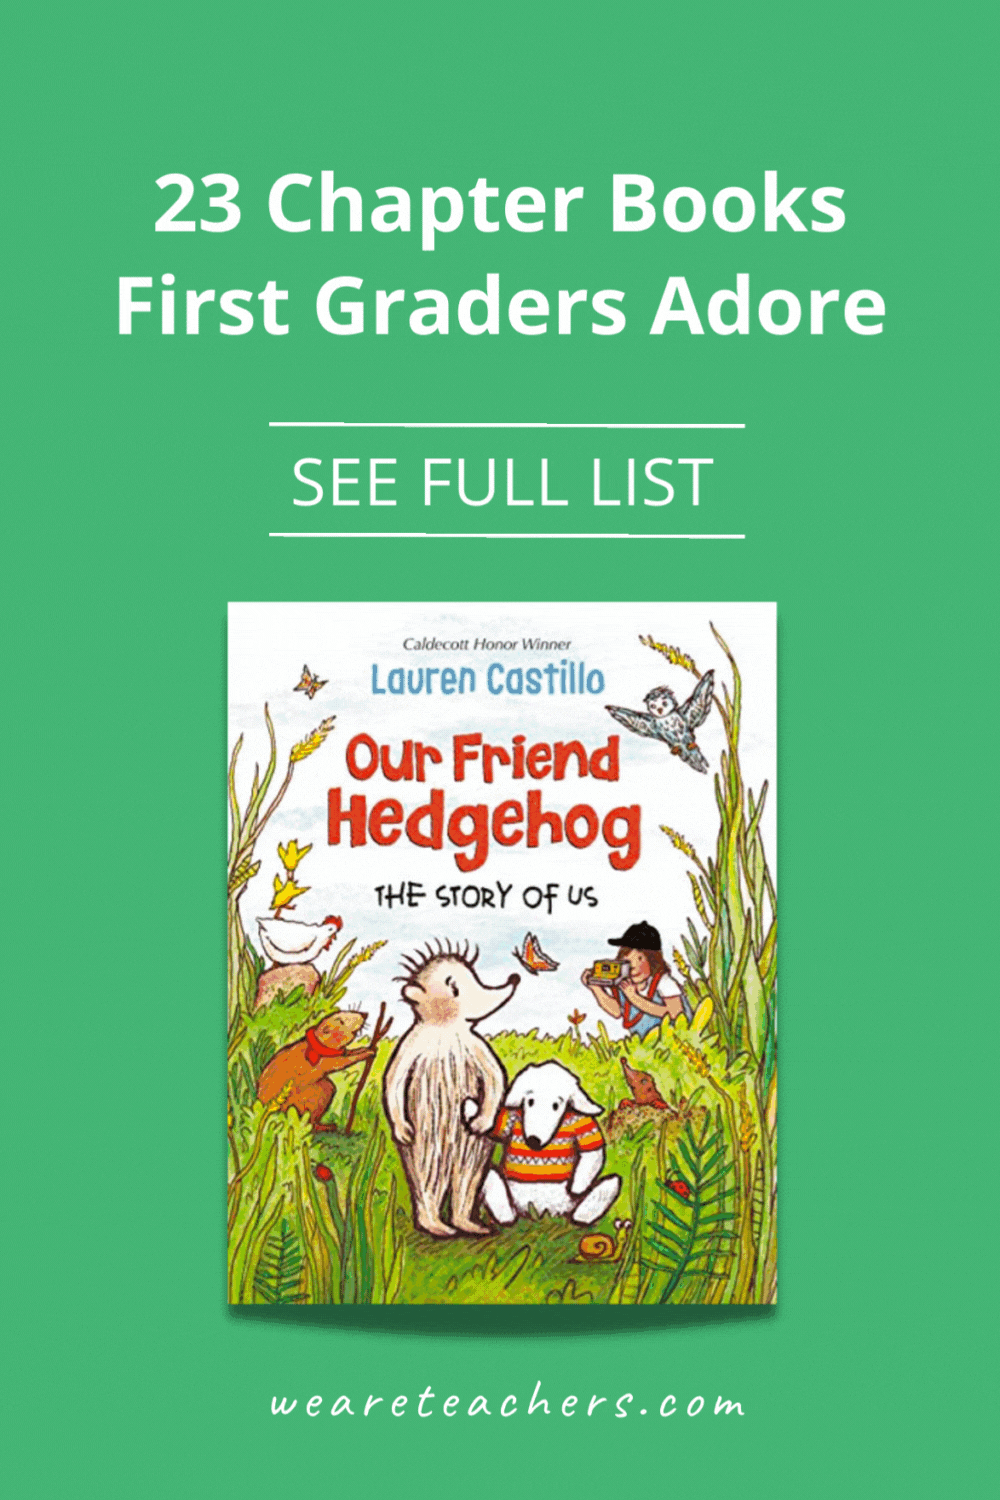 Check out this list for recommendations of exceptional chapter books for first graders to support developing reading skills.